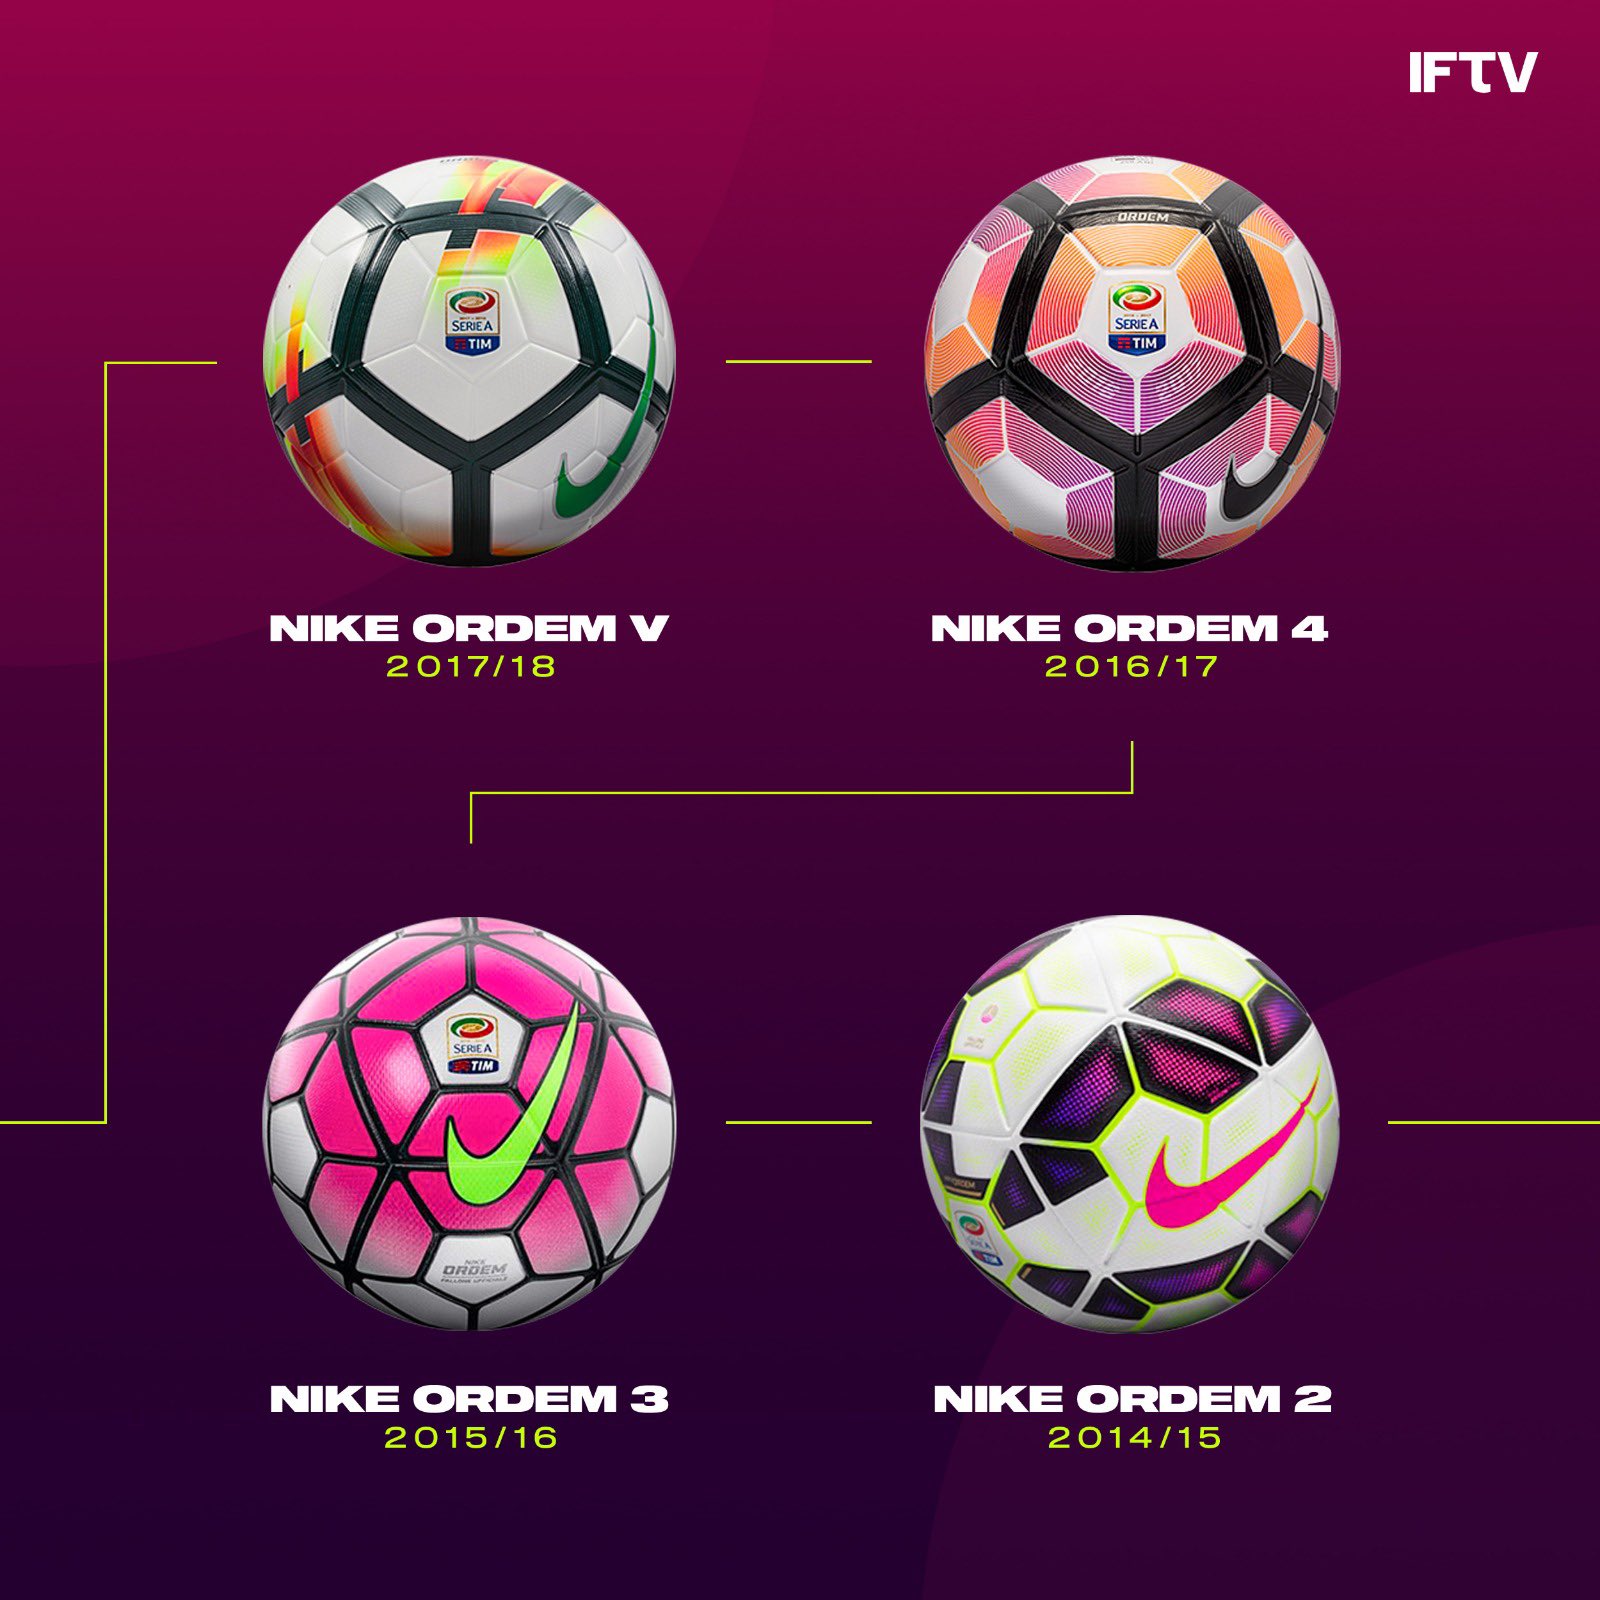 Artificial estanque Año Nuevo Lunar Italian Football TV en Twitter: "Nike x Serie A match ball history - Which  is your favorite? 😍 @SerieA_EN recently announced that Puma will take over  as their official match ball supplier